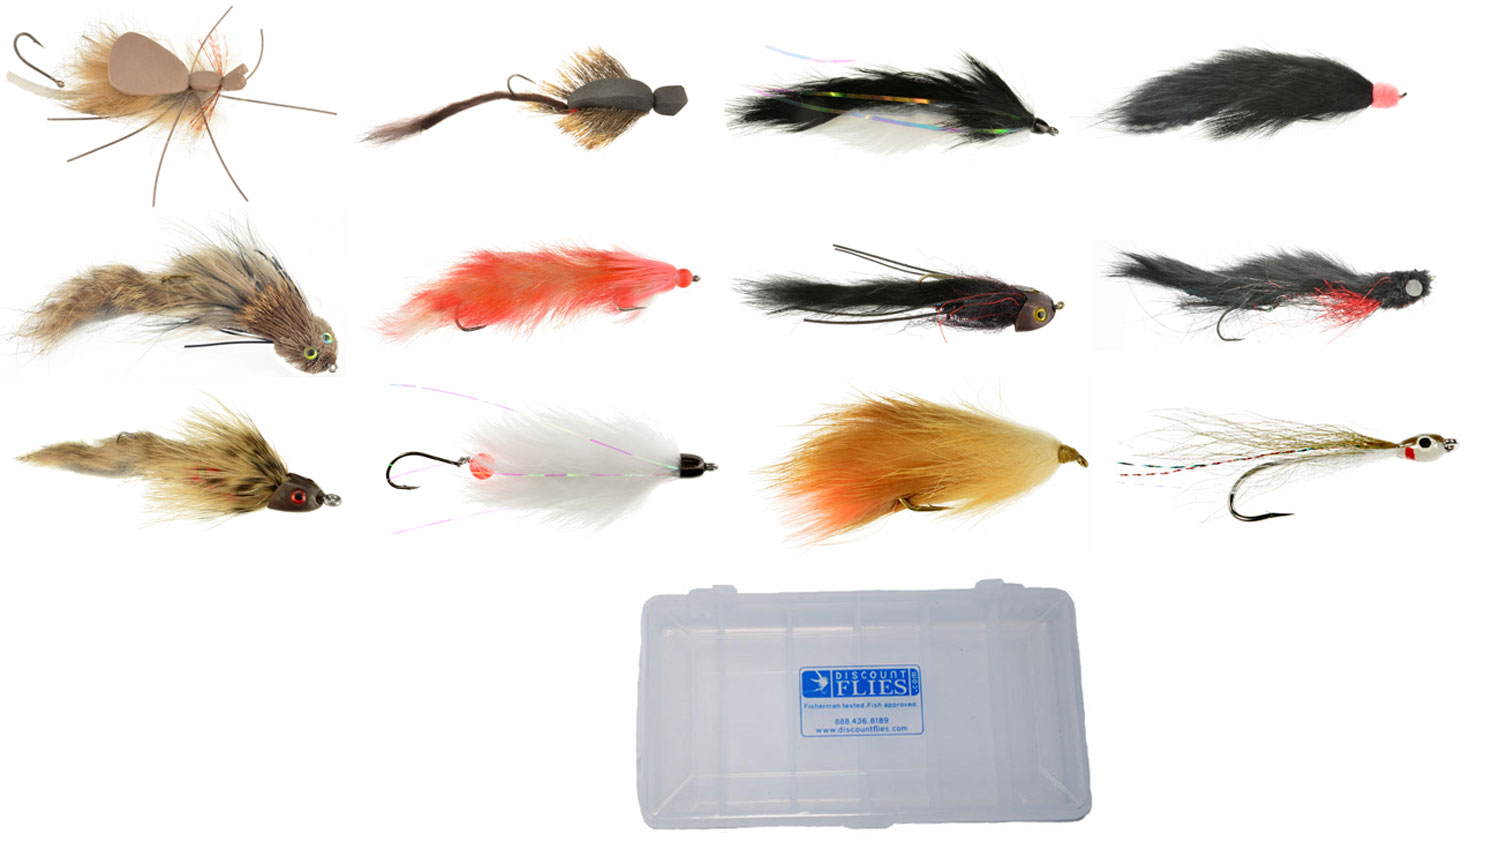 Teton Fly Box for Articulated Fishing Flies #1495 – Tidy Crafts